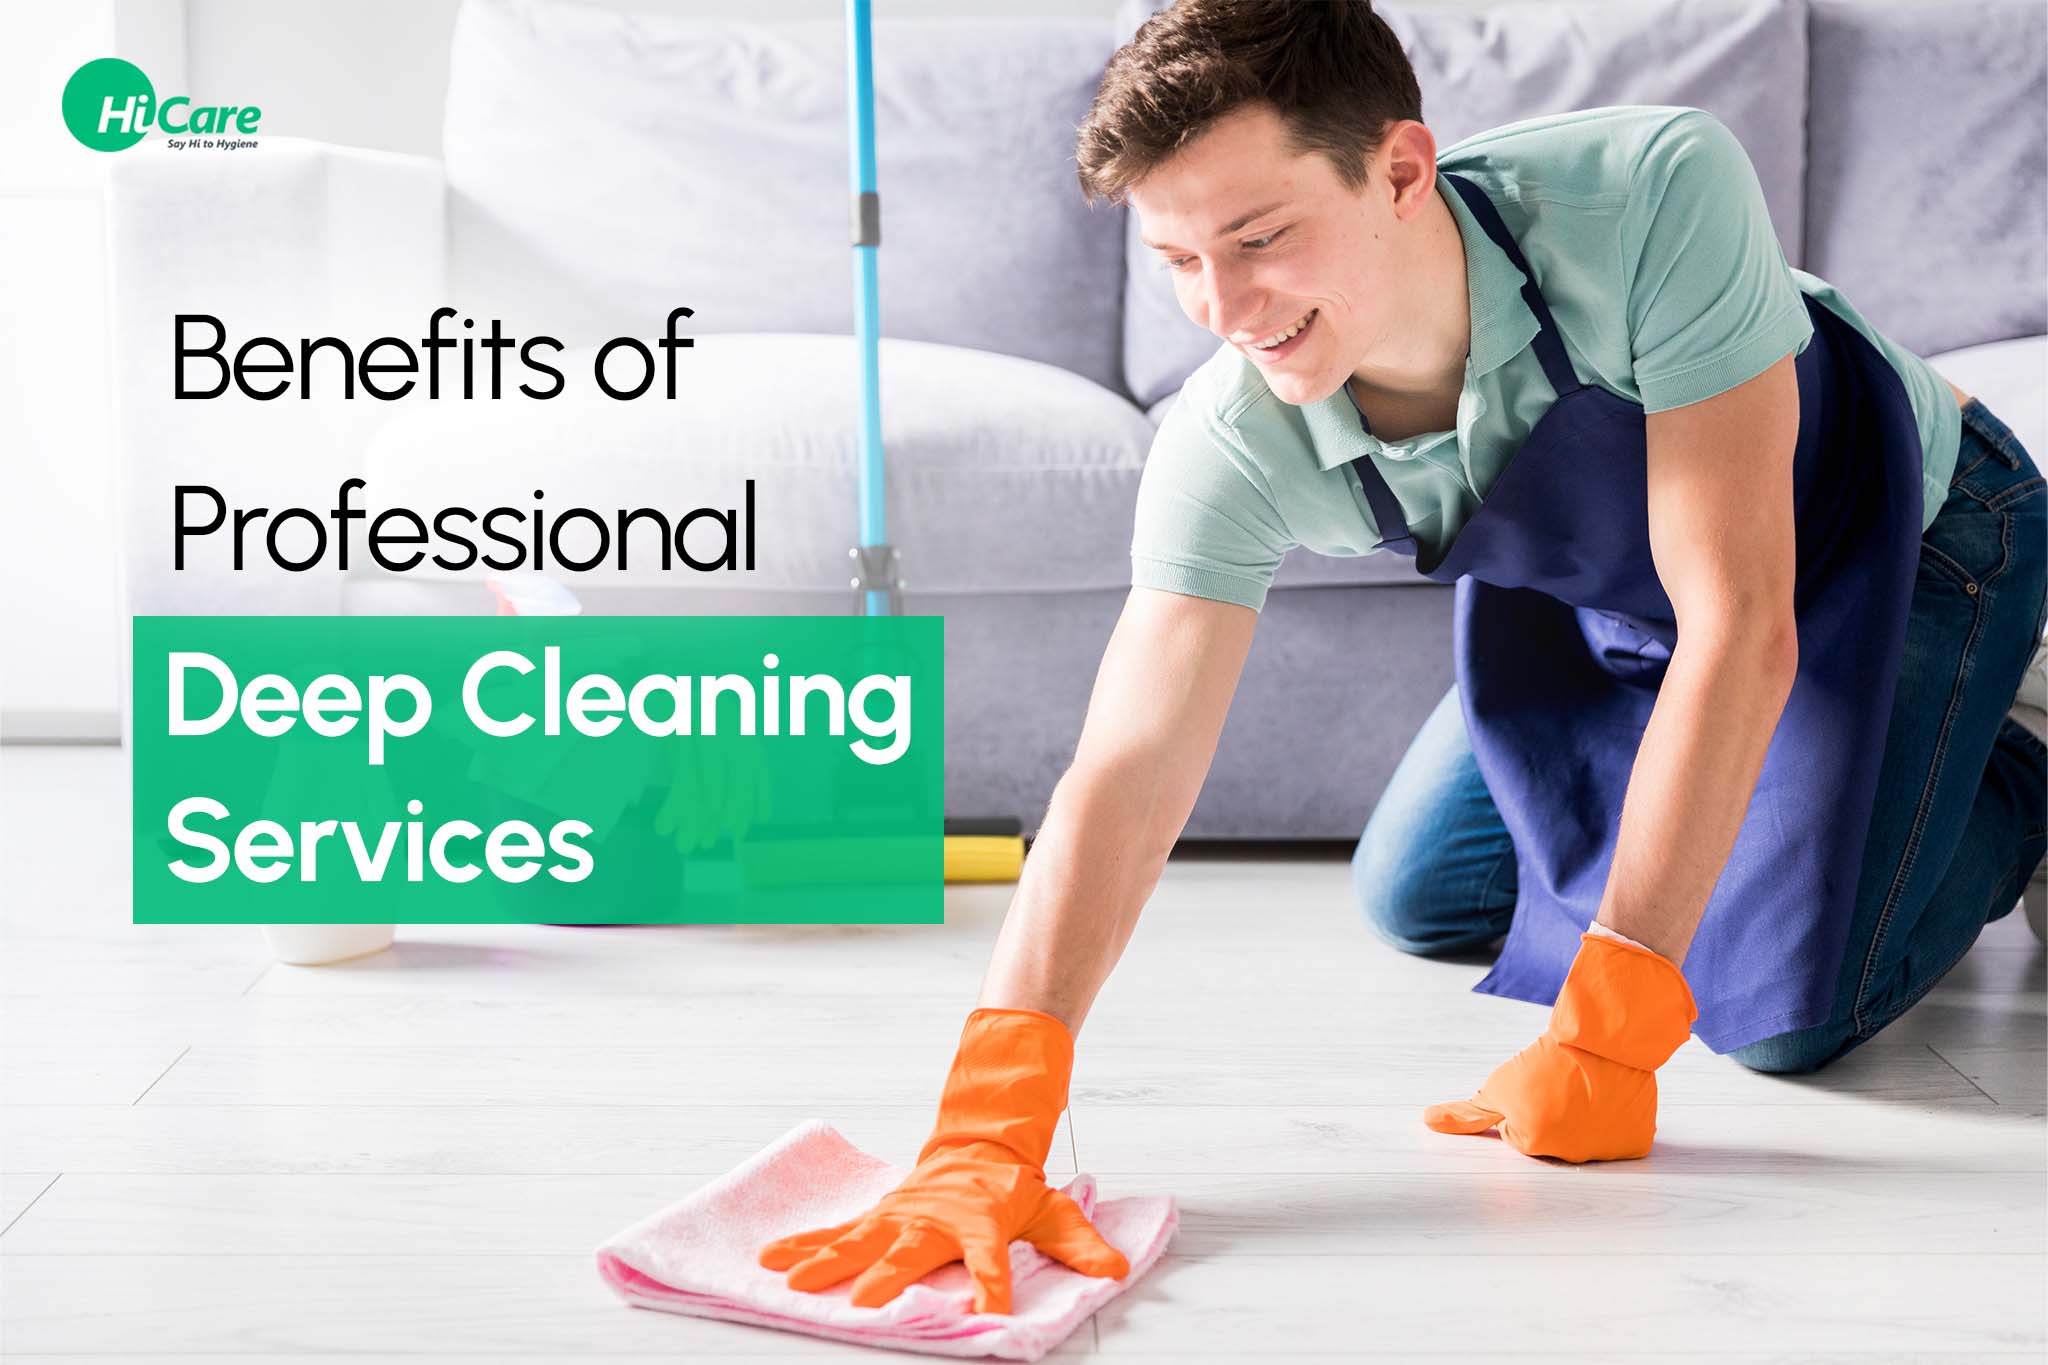 Benefits of Professional Deep Cleaning Services